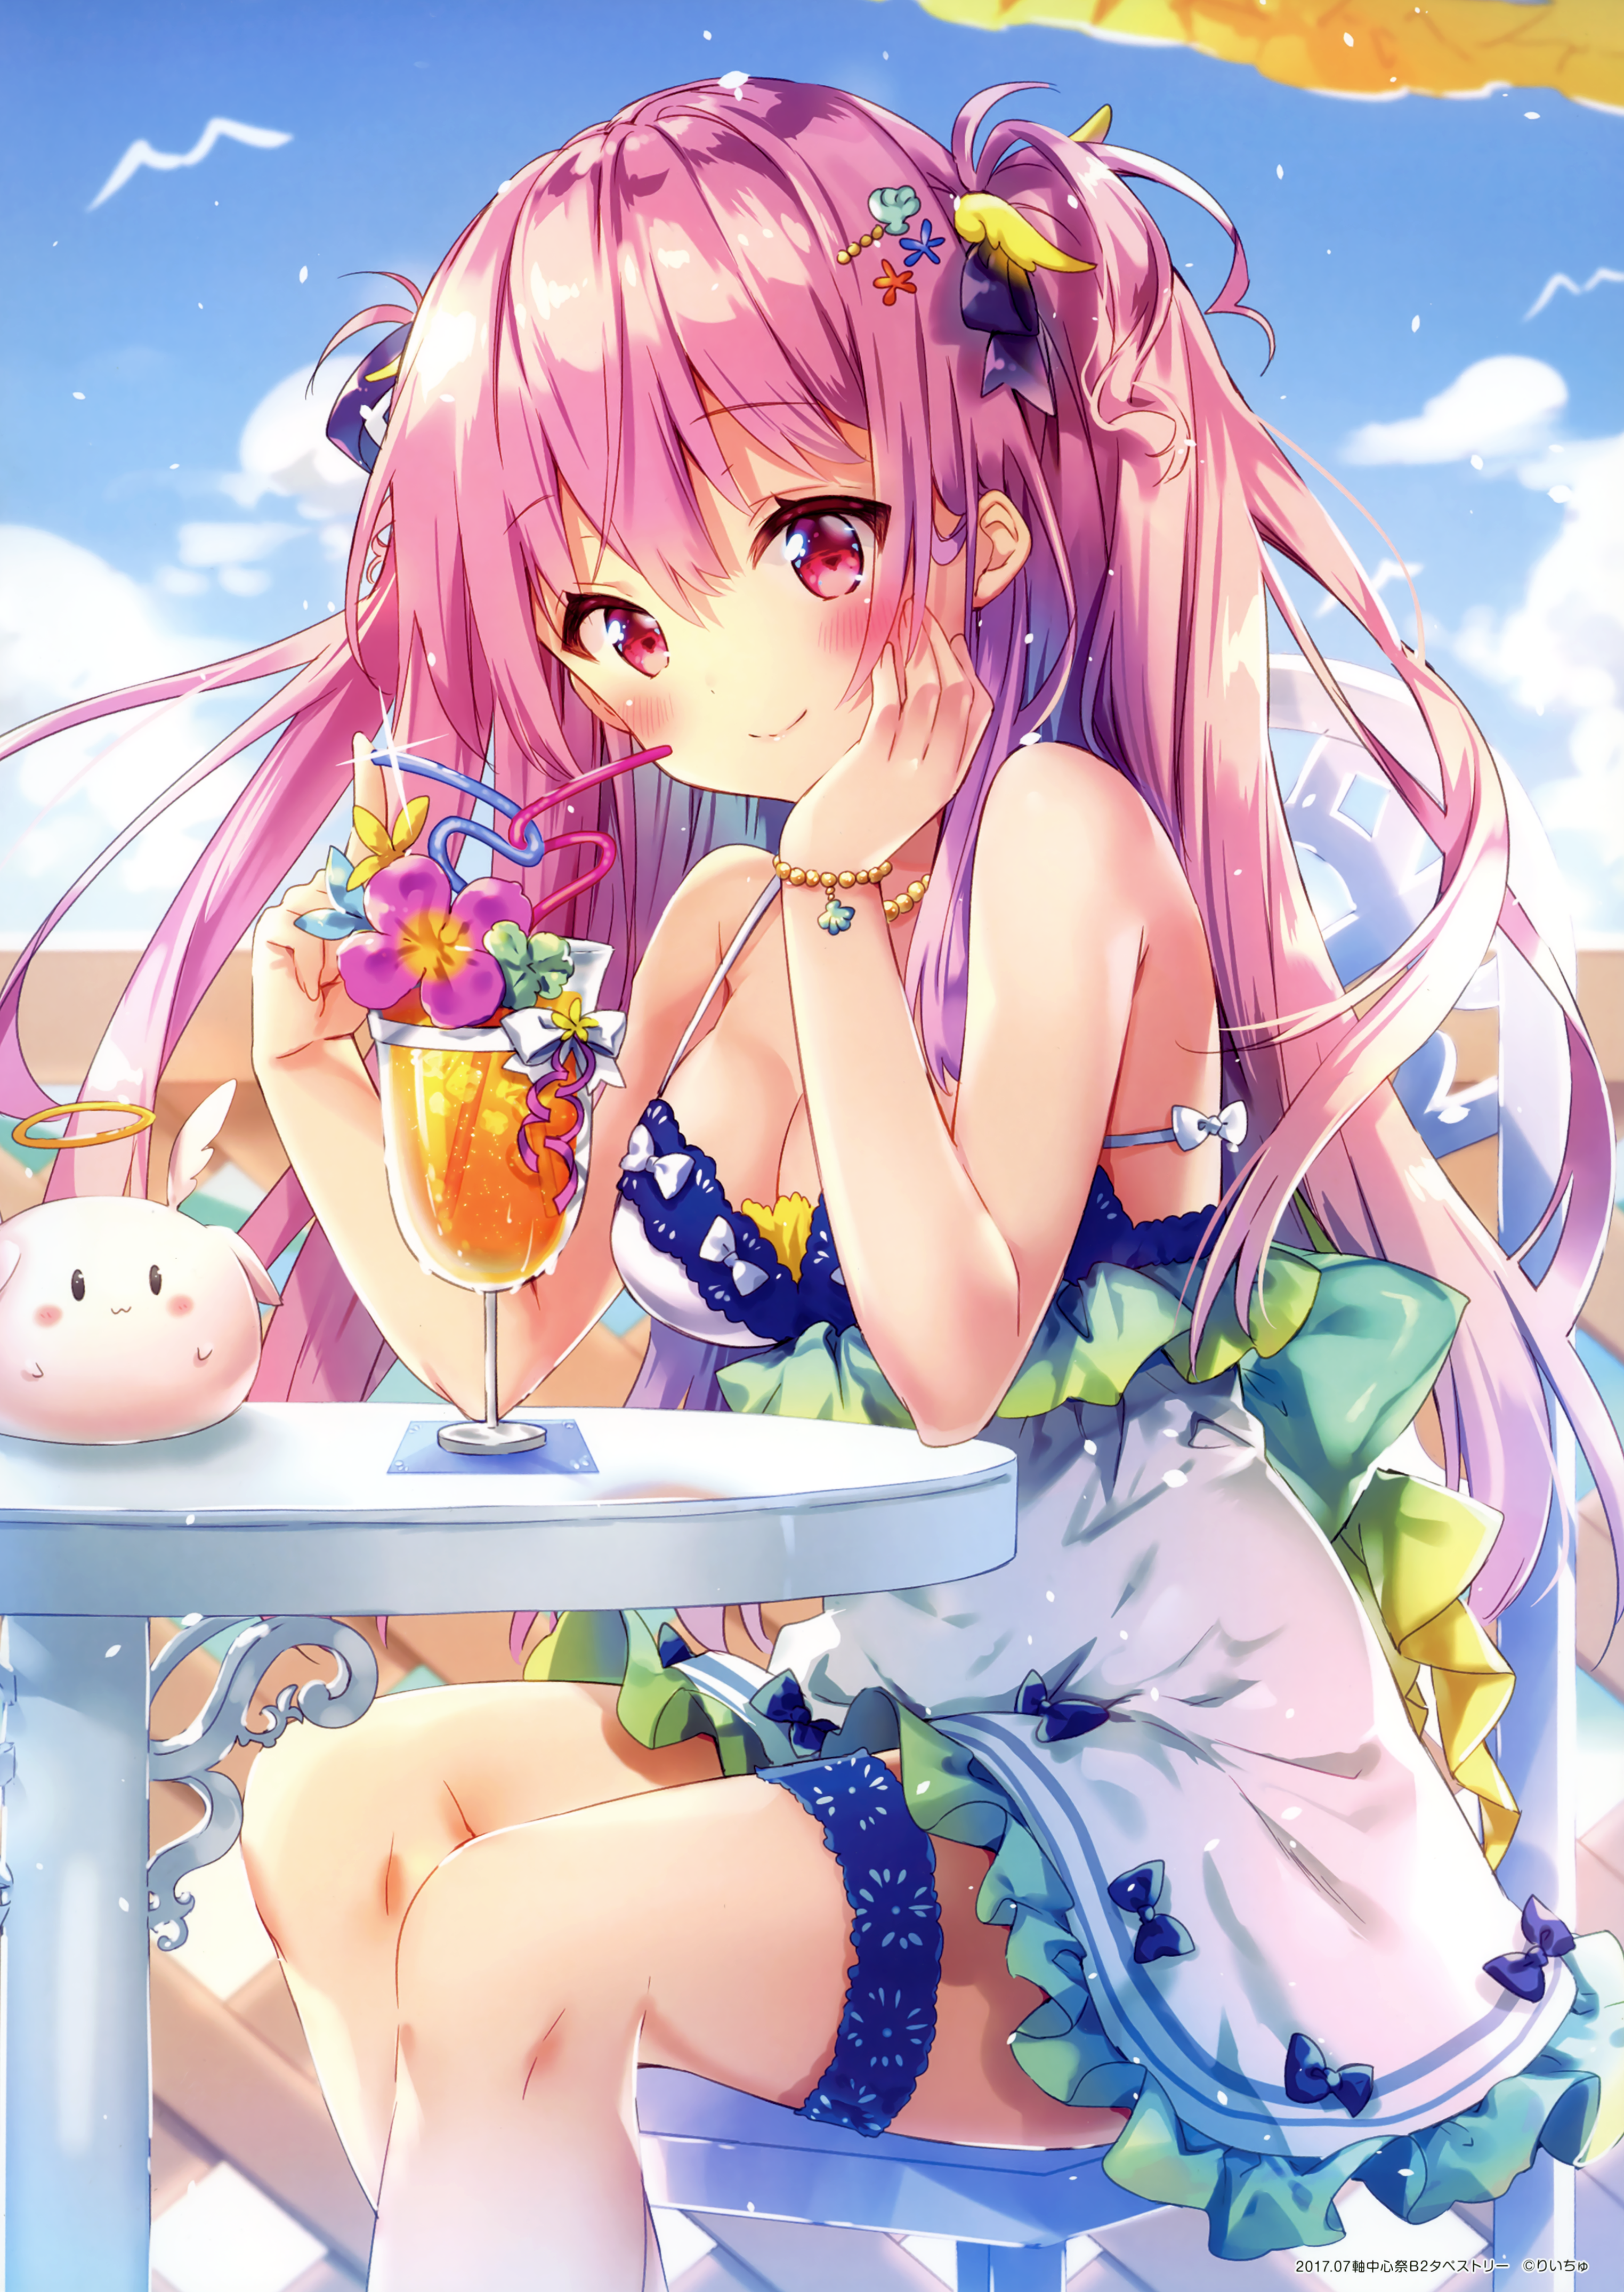 Anime 3047x4300 anime girls Riichu Rianastia Flugel pink hair long hair twintails sky looking at viewer dress white dress blushing smiling pink eyes cocktails drink sun dress cleavage boobs flowers hair ornament clouds bow tie legs garter (cloth) gold bracelet portrait display chair loli